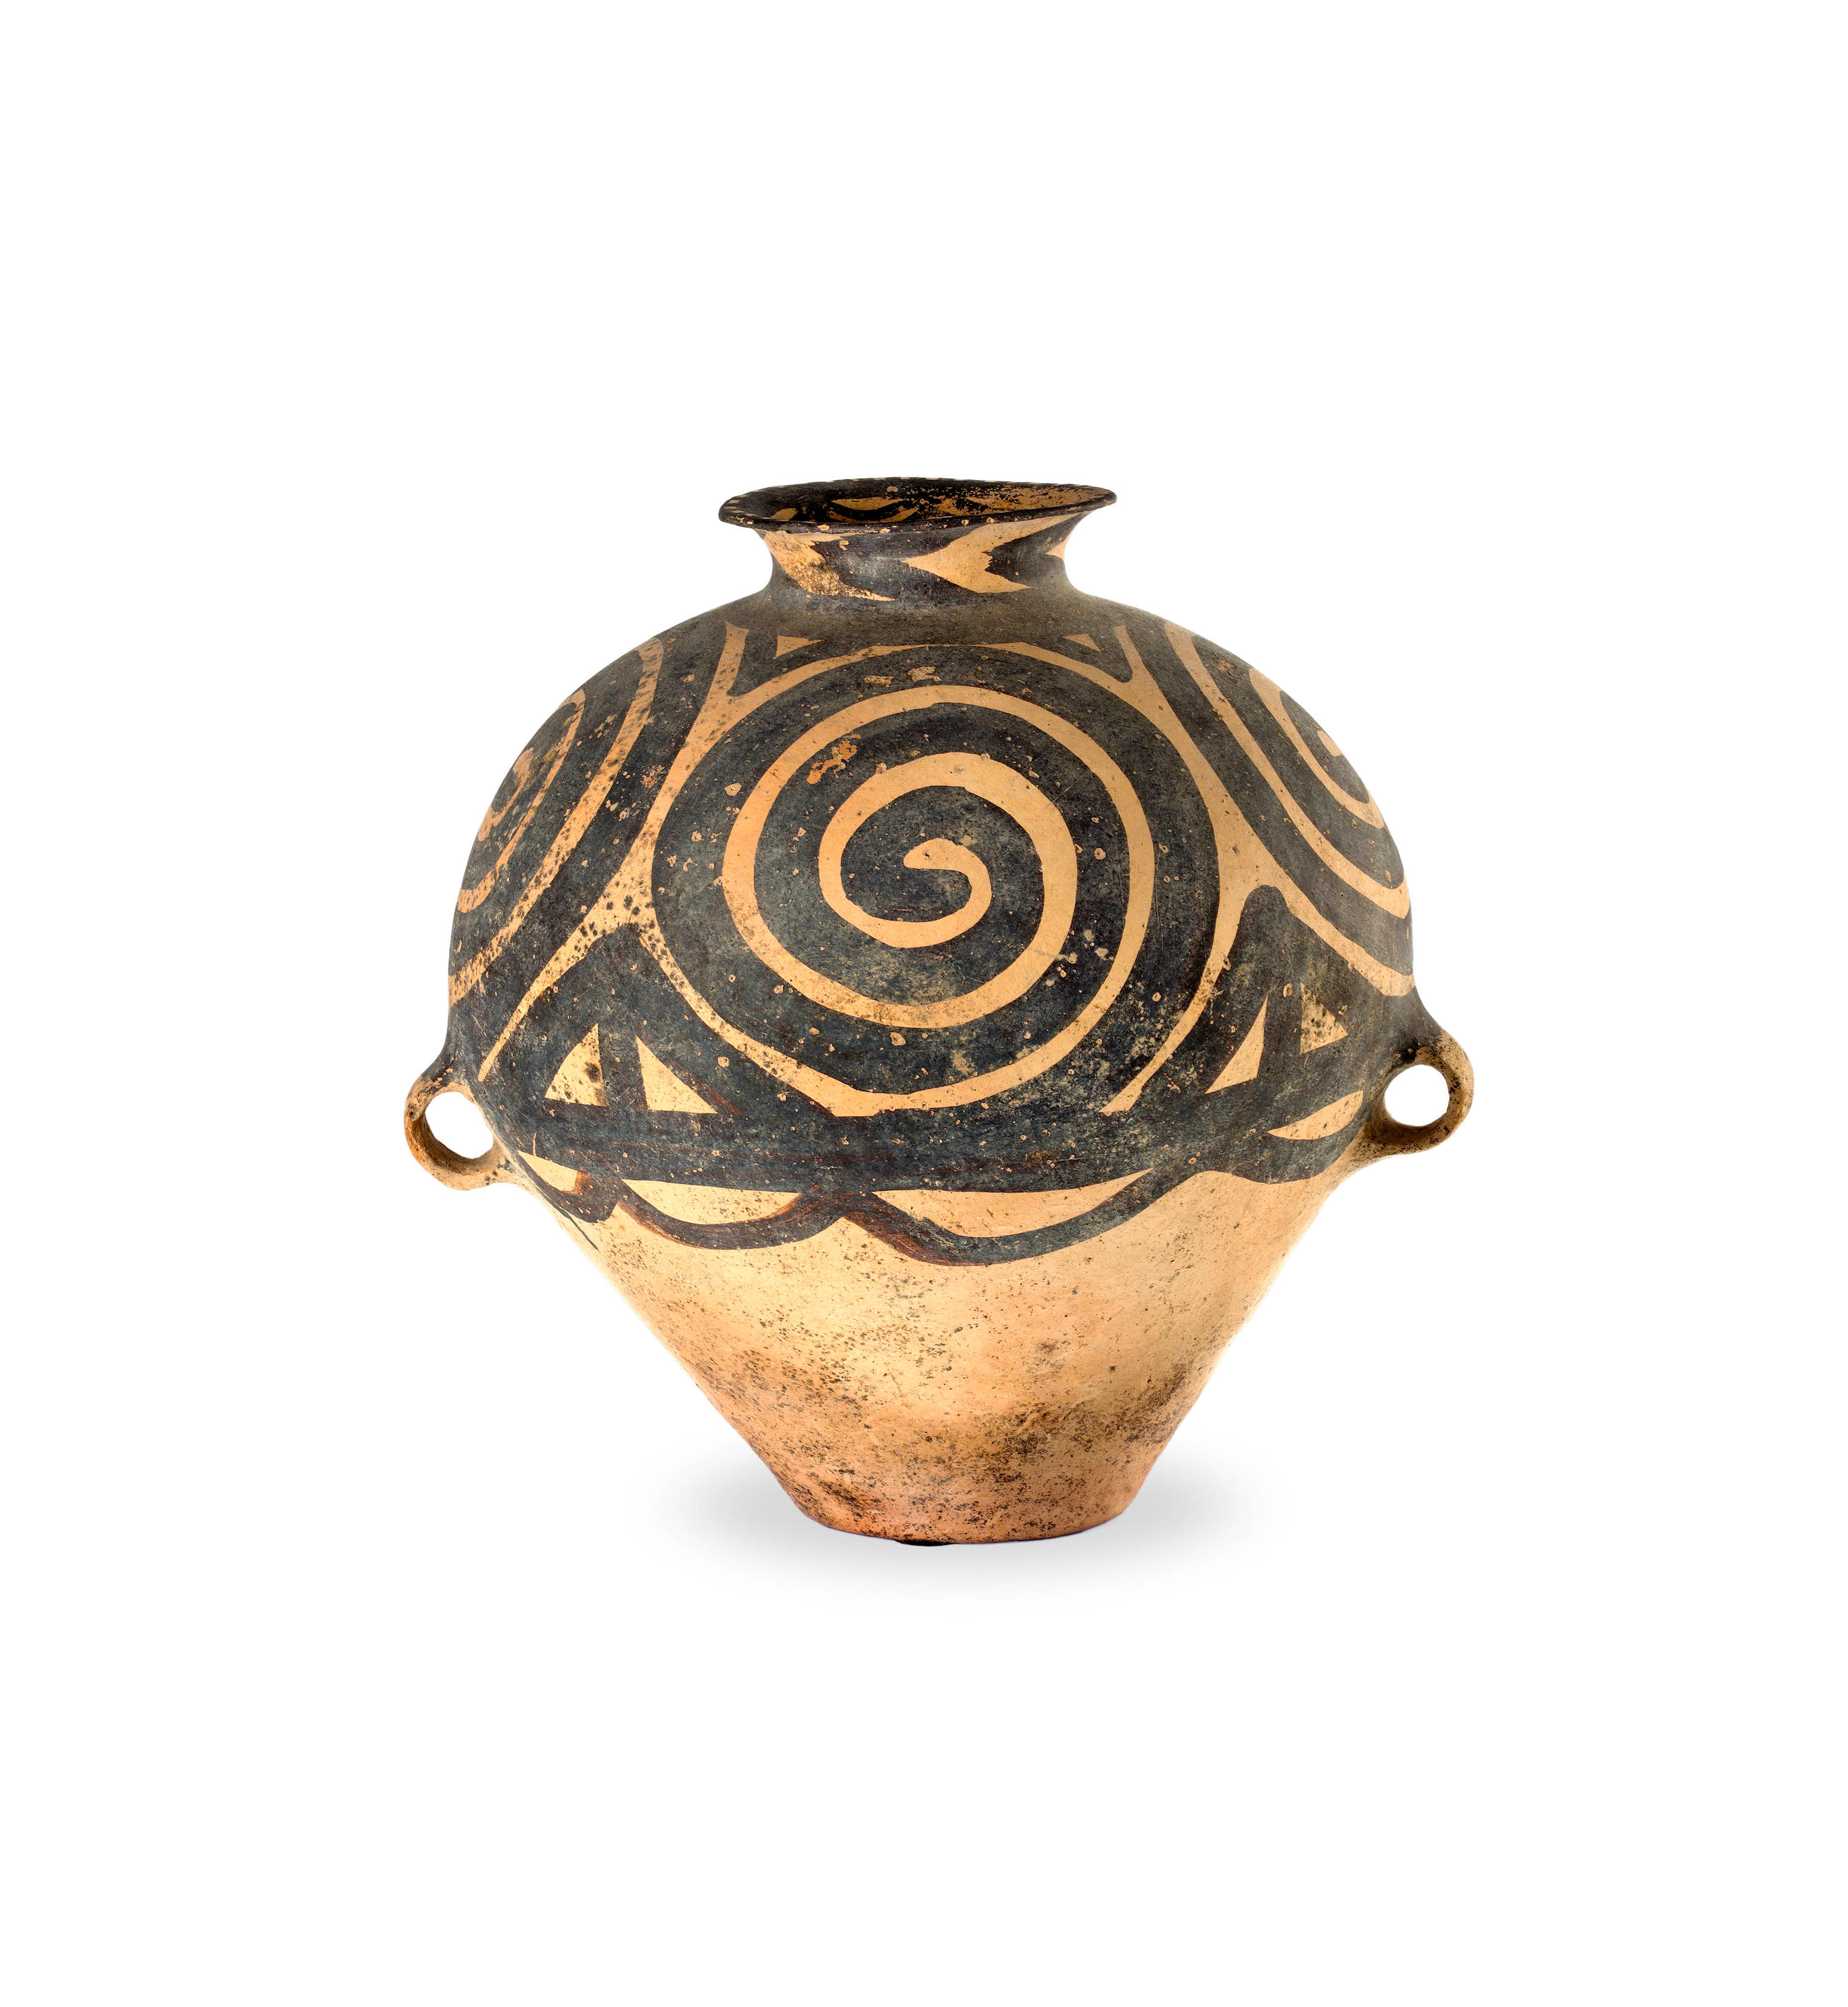 Form Follows Function: The Story of Chinese Neolithic Pottery, Chinese  Works of Art